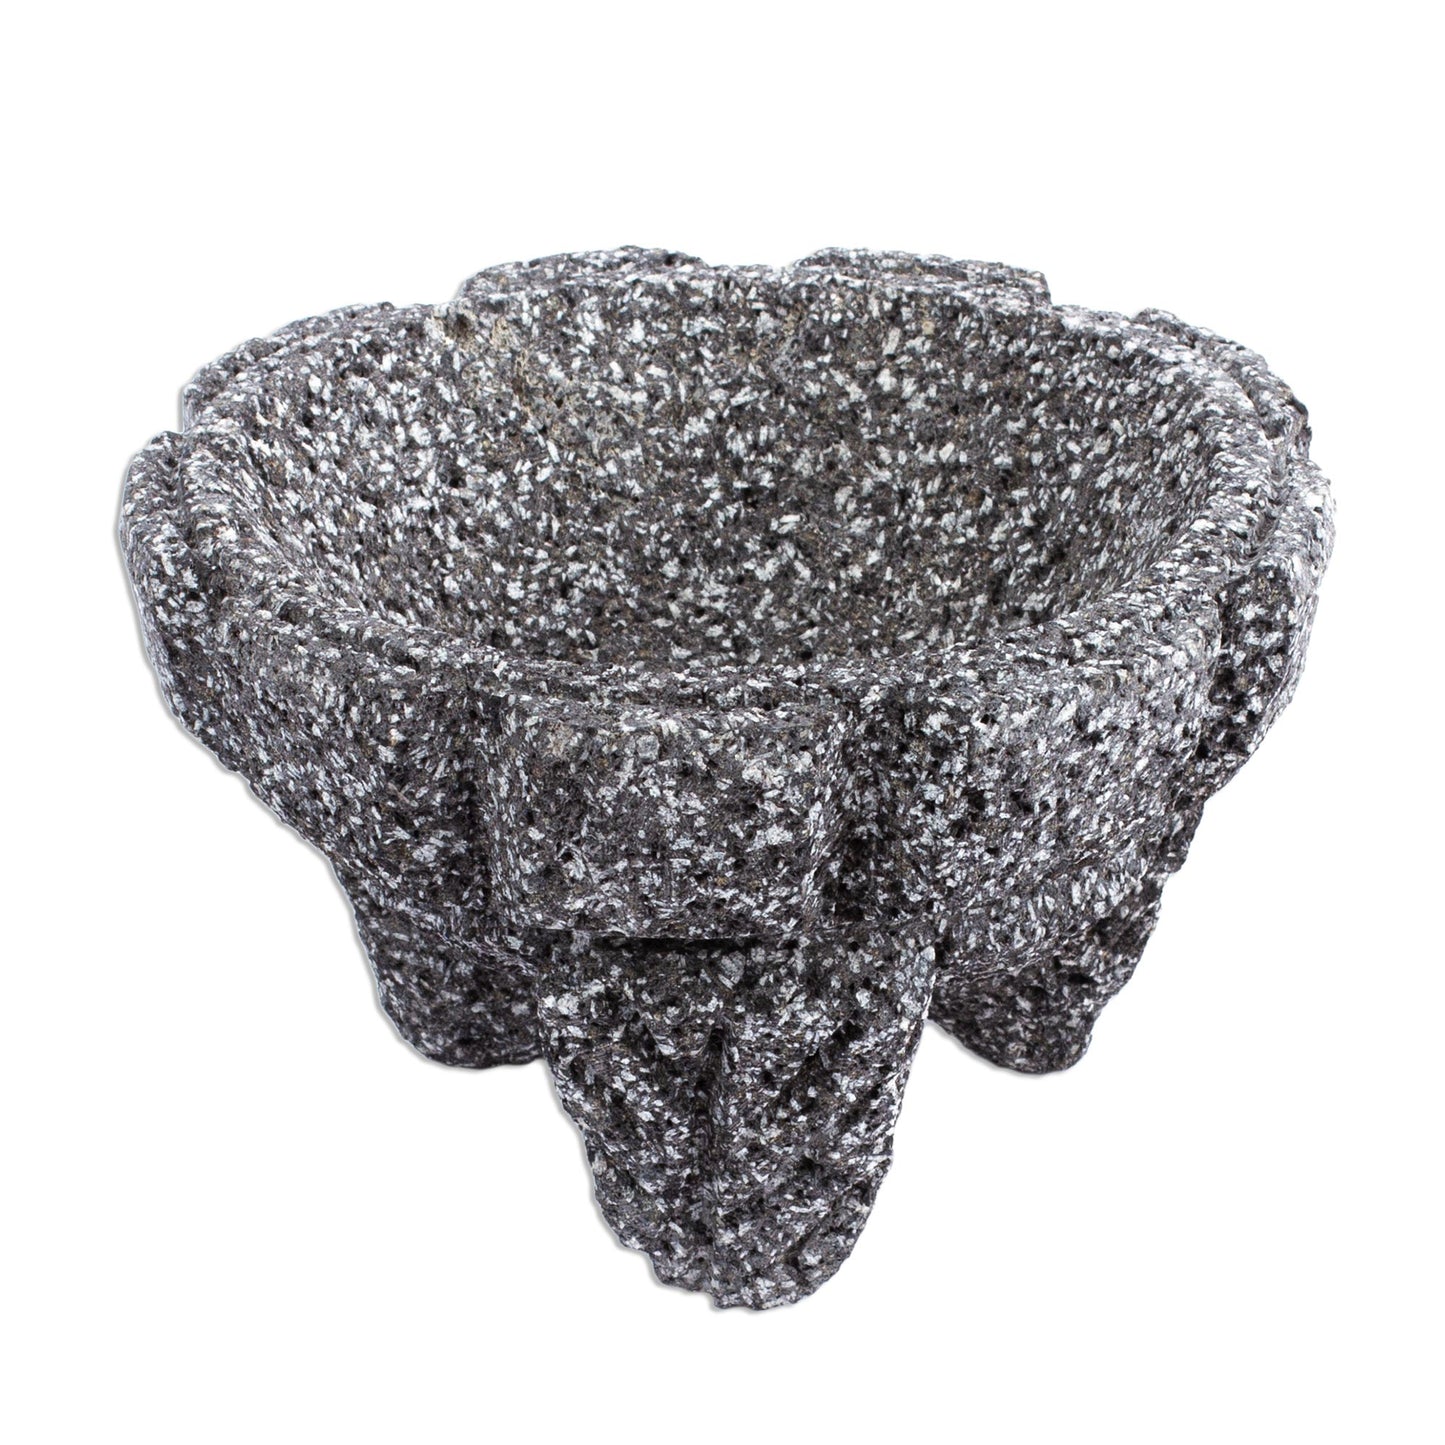 Ceremonial Tradition Handcrafted Ceremonial Style Molcajete Mortar